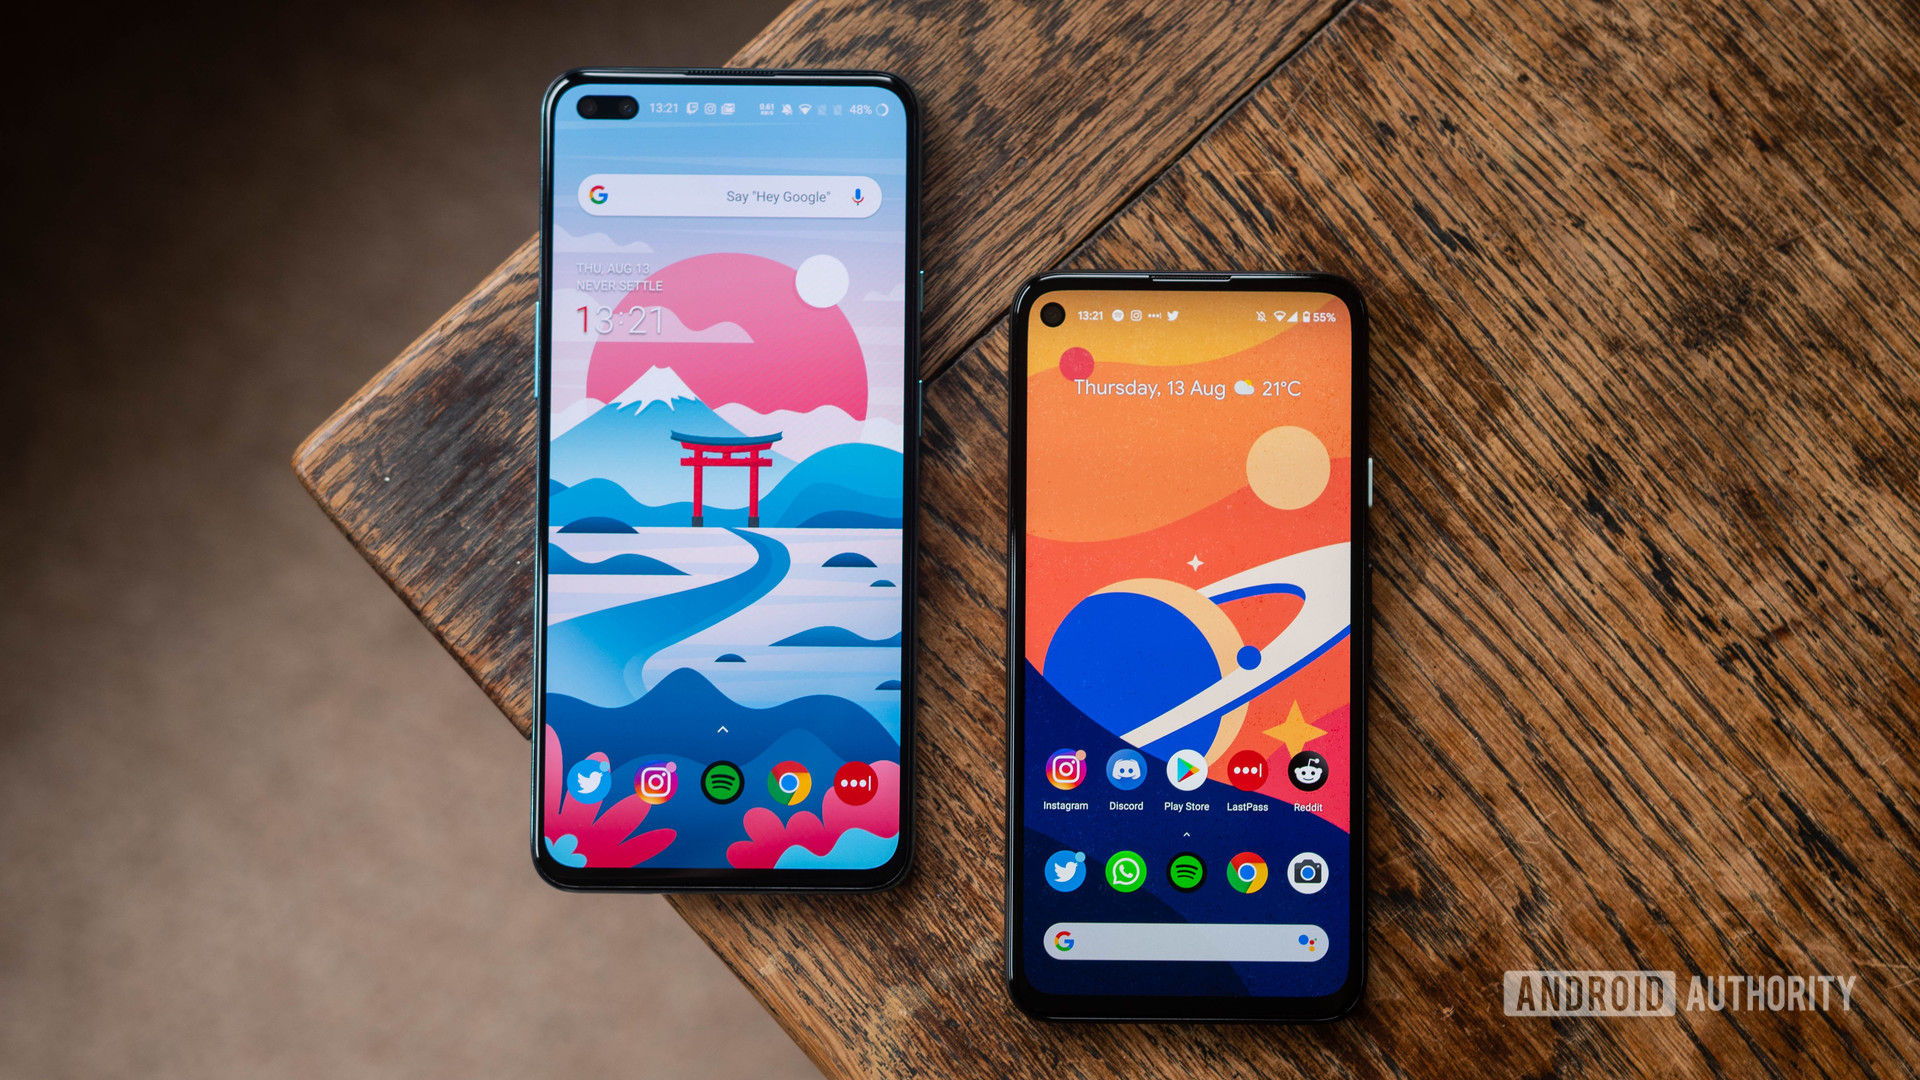 OnePlus Nord vs Pixel 4a Both devices side by side in a staggered view